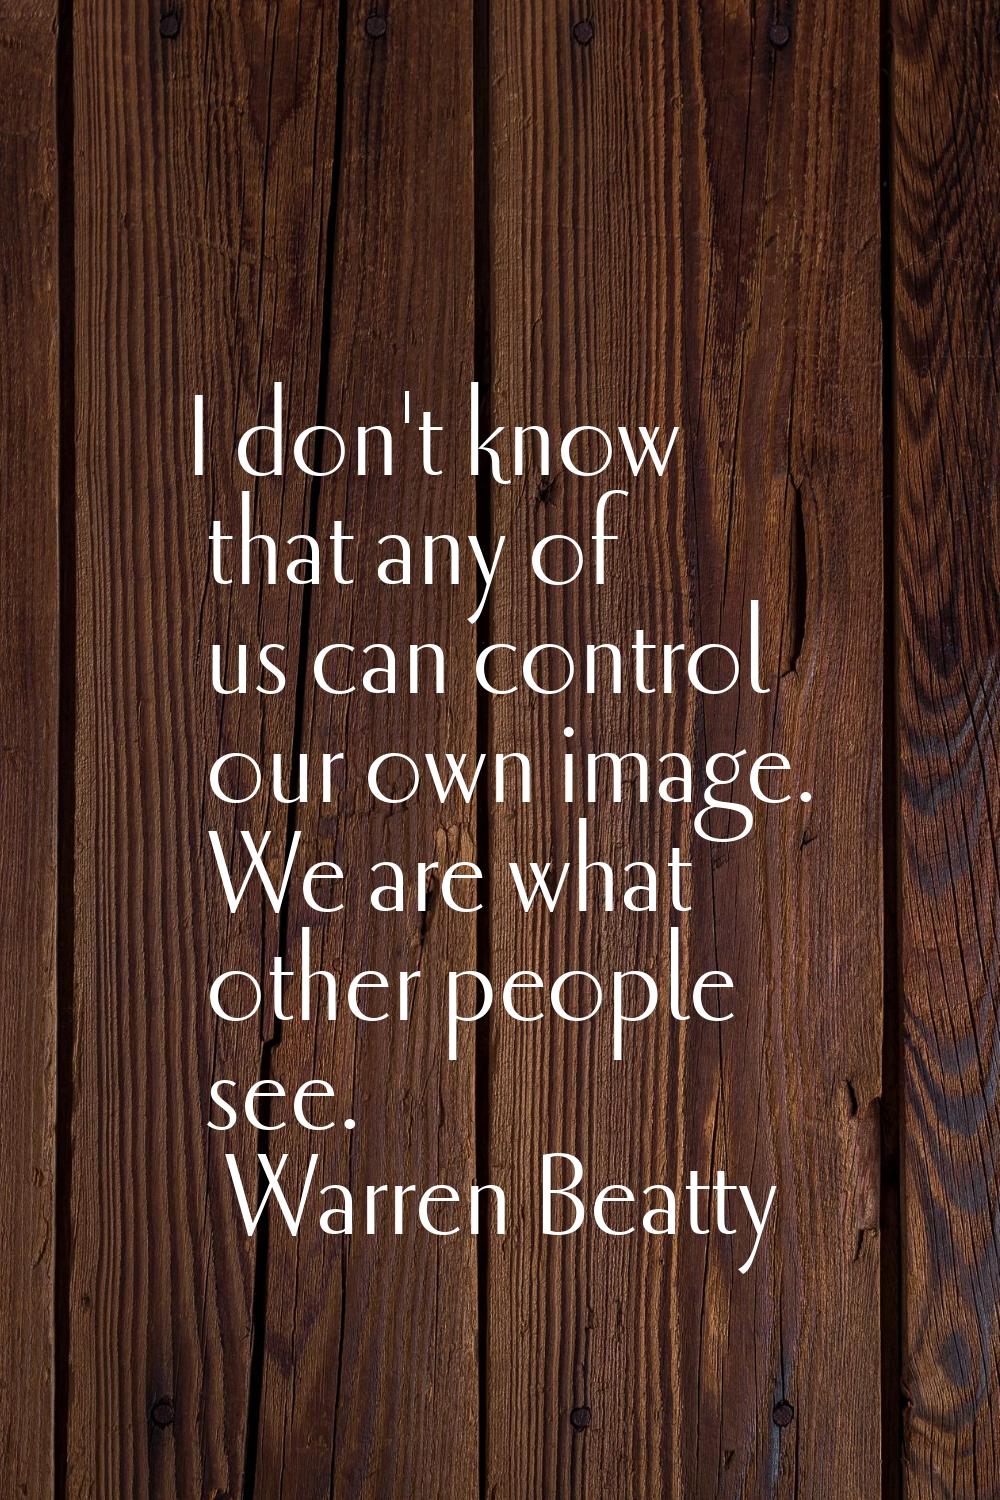 I don't know that any of us can control our own image. We are what other people see.